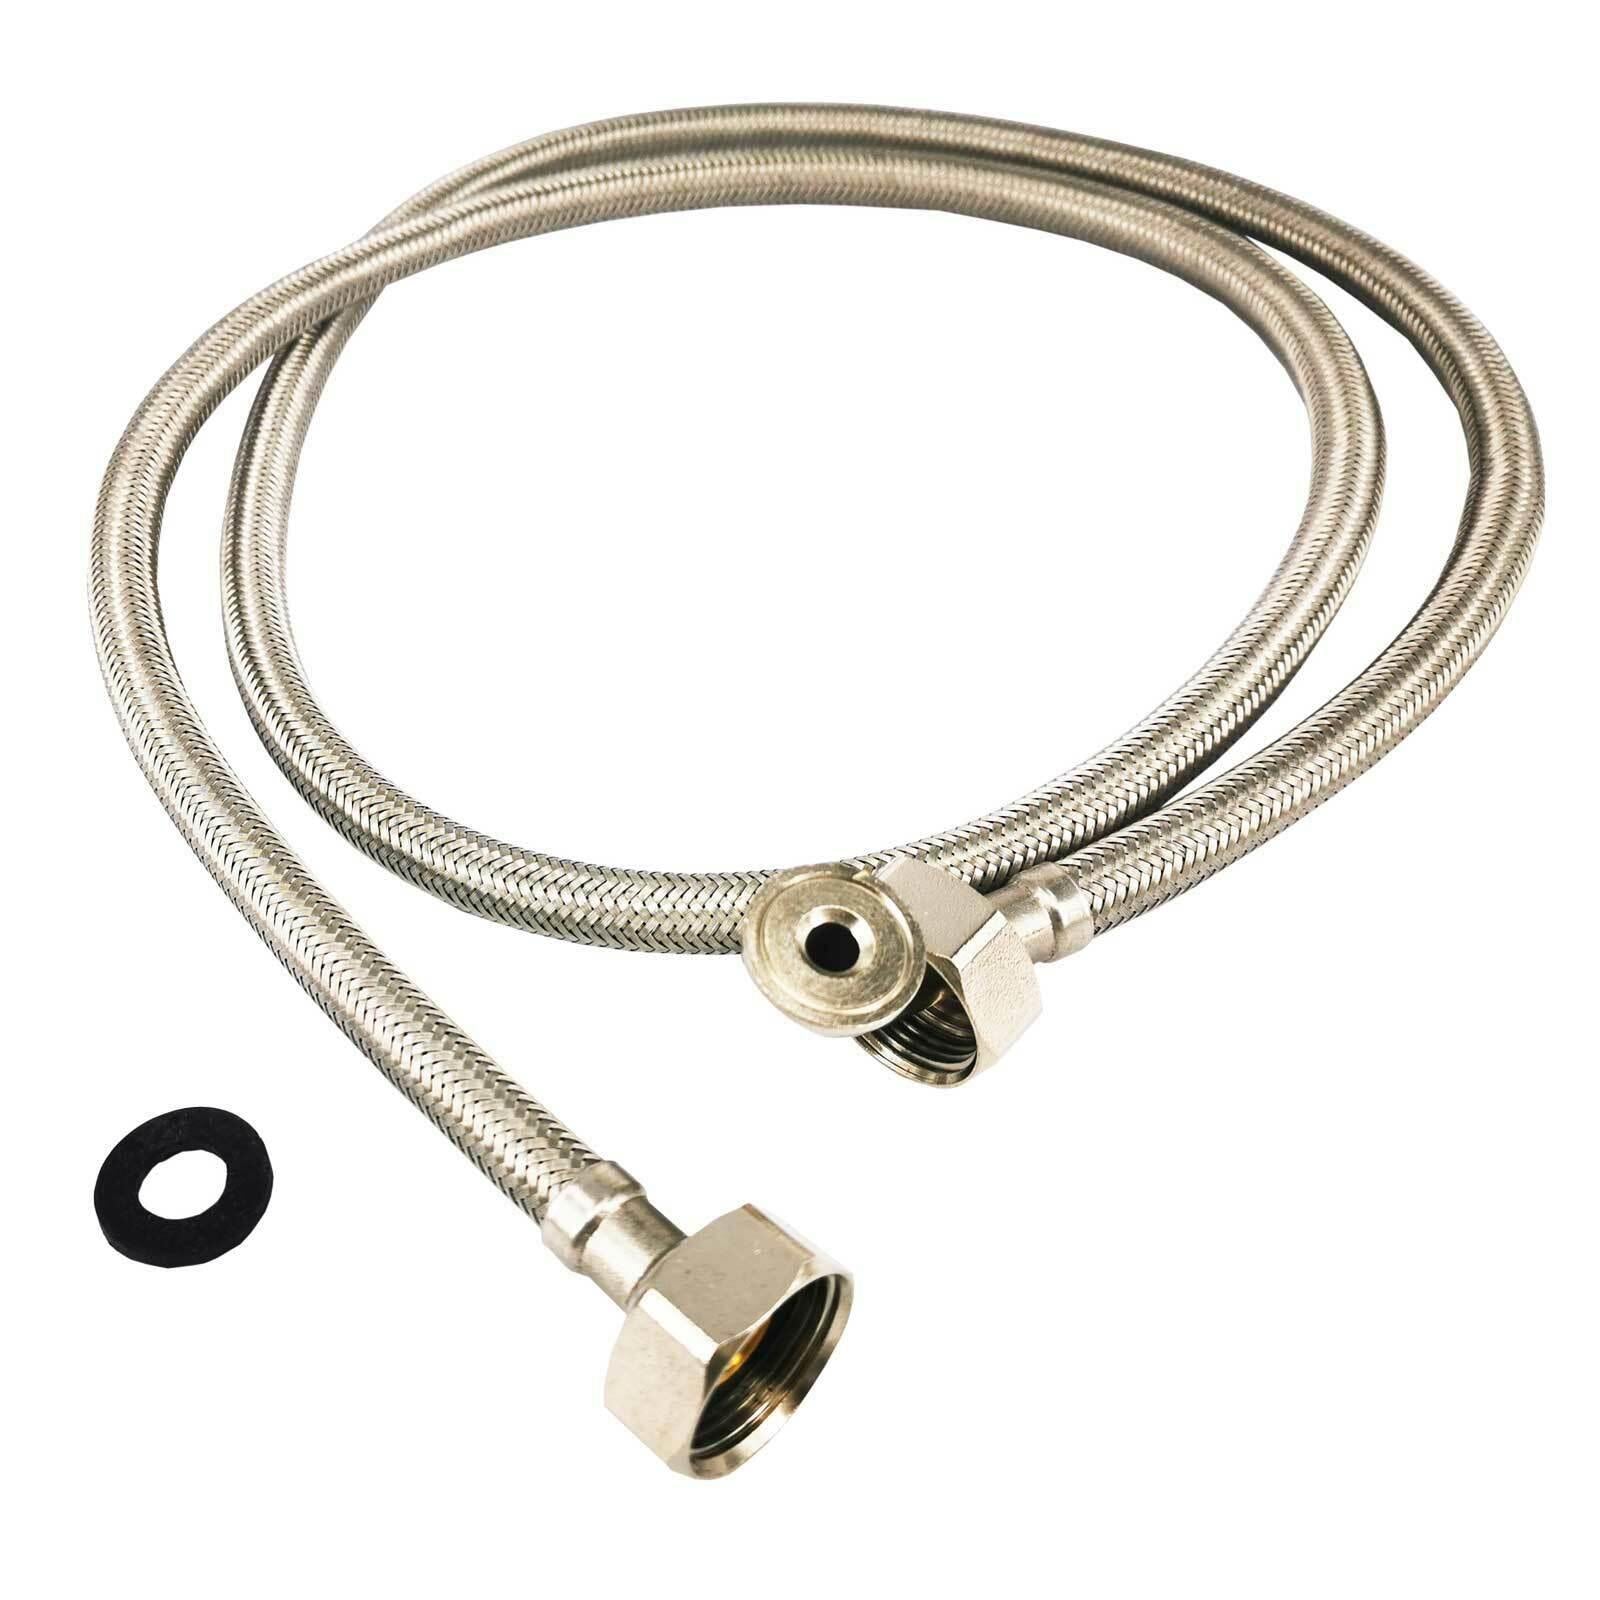 Stainless Steel Washing Machine Hot / Cold Water Inlet Hose 2.0M 3/4 Braided Sparesbarn